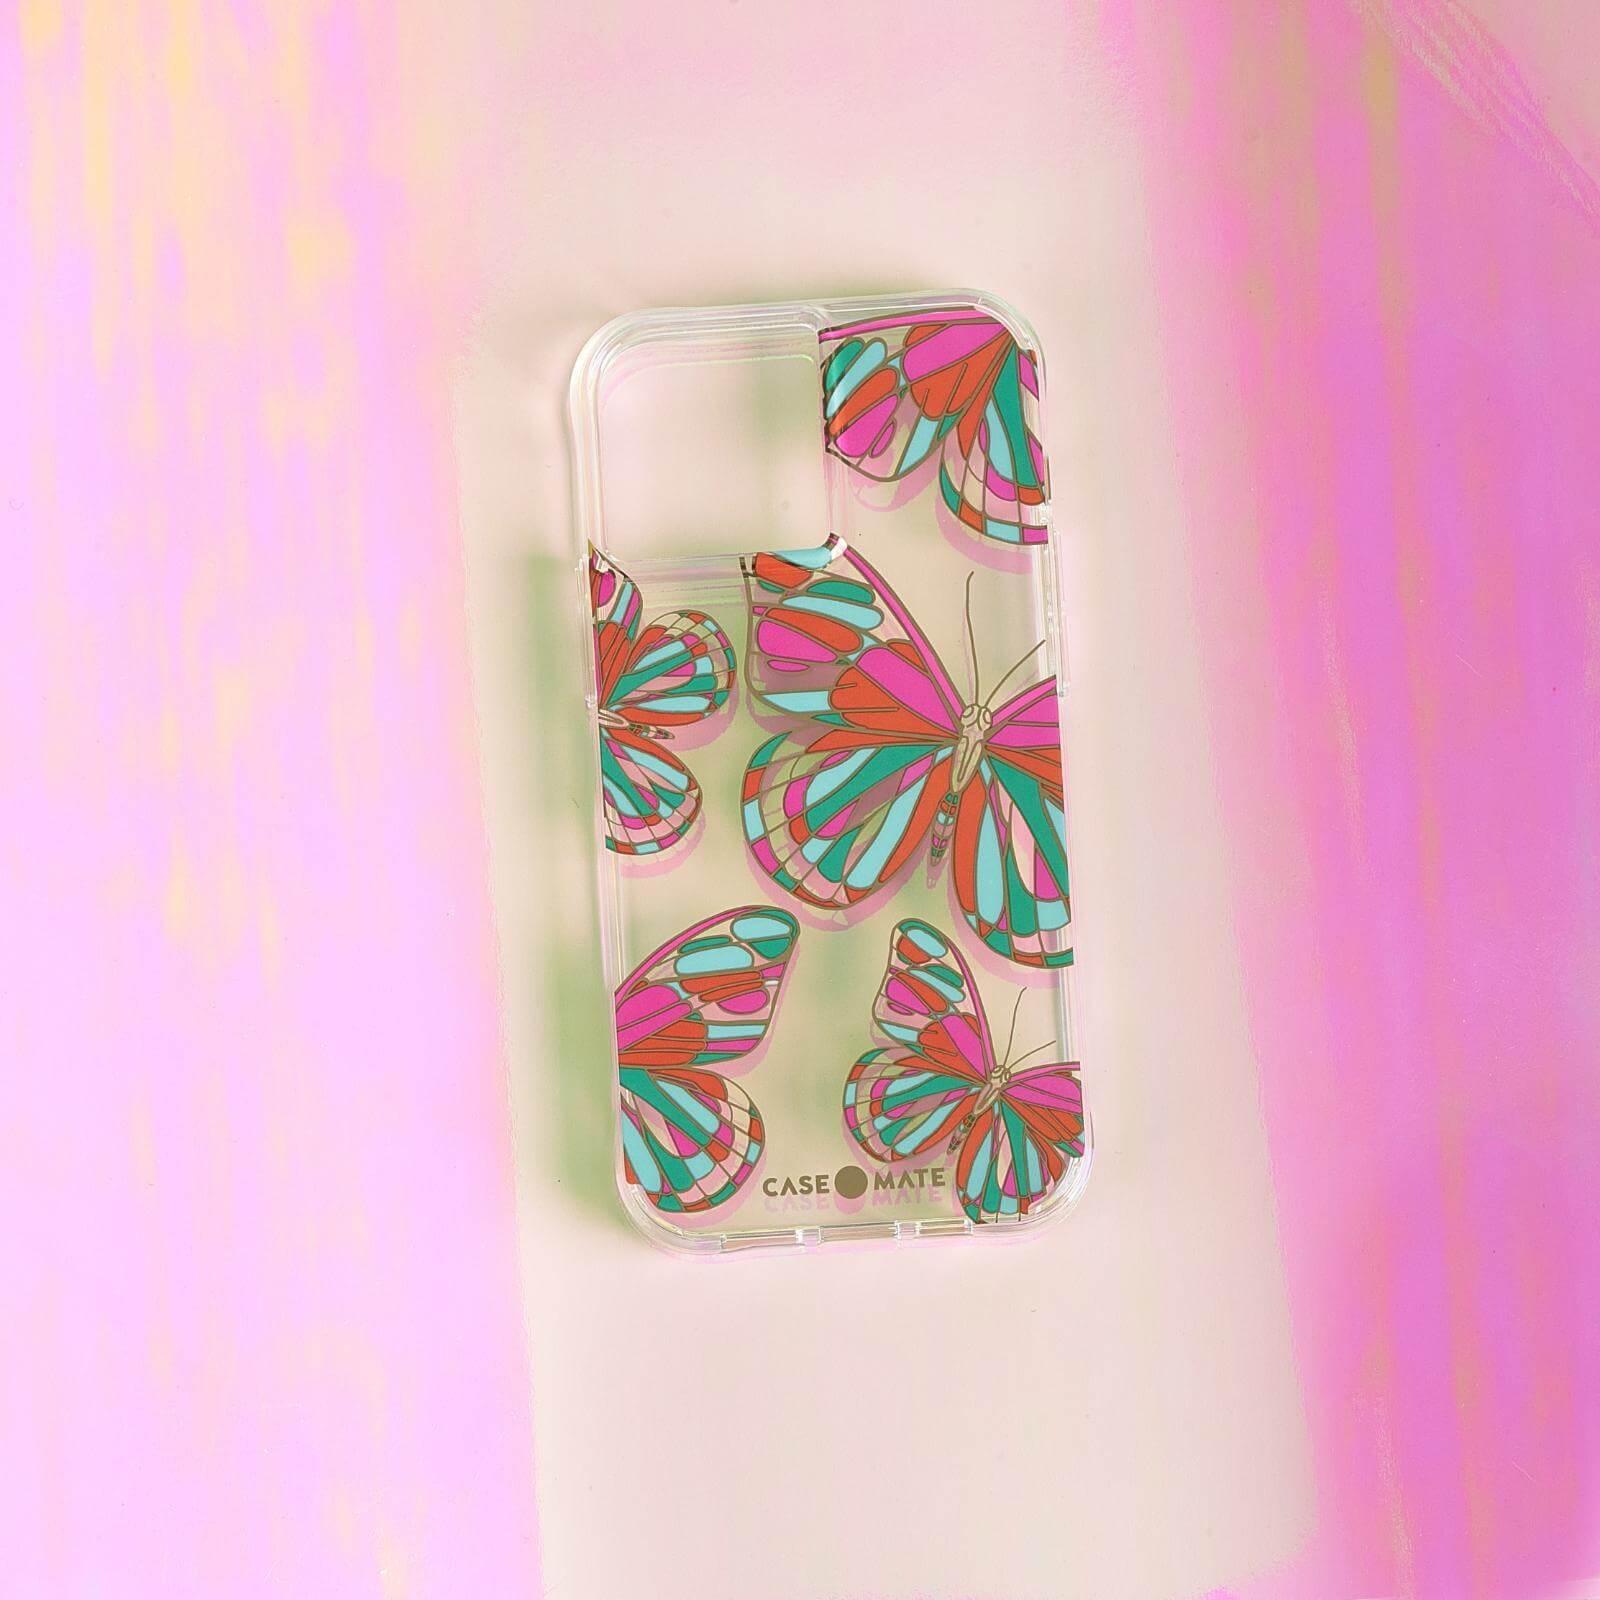 Butterfly printed case for iPhone 13 mini on pink background. color::Butterflies